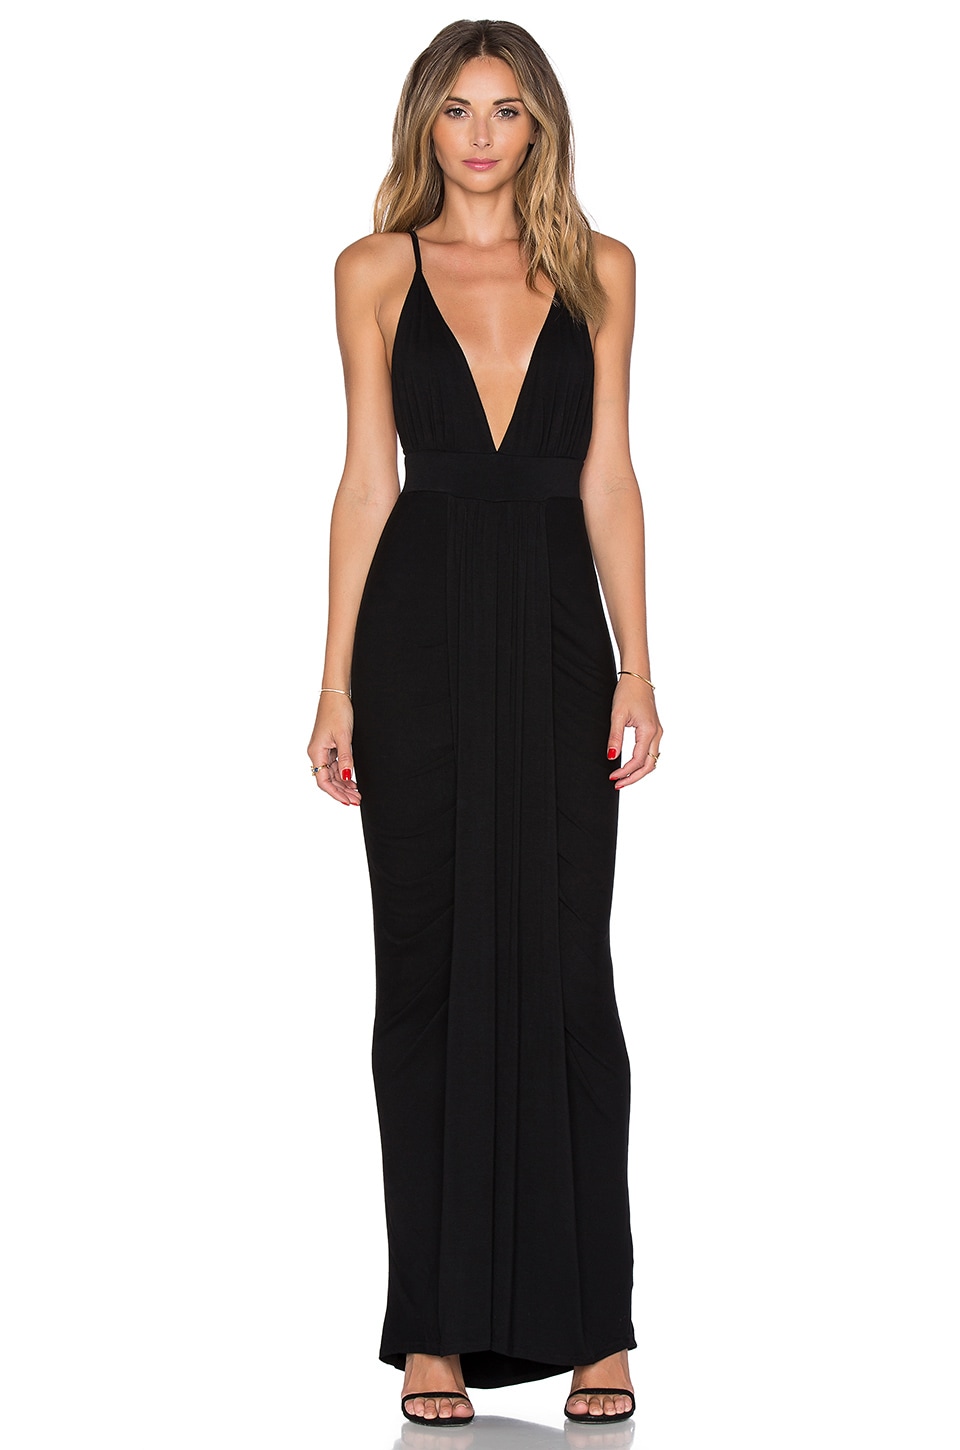 Toby Heart Ginger x Love Indie Walk This Way Maxi Dress in Black | REVOLVE